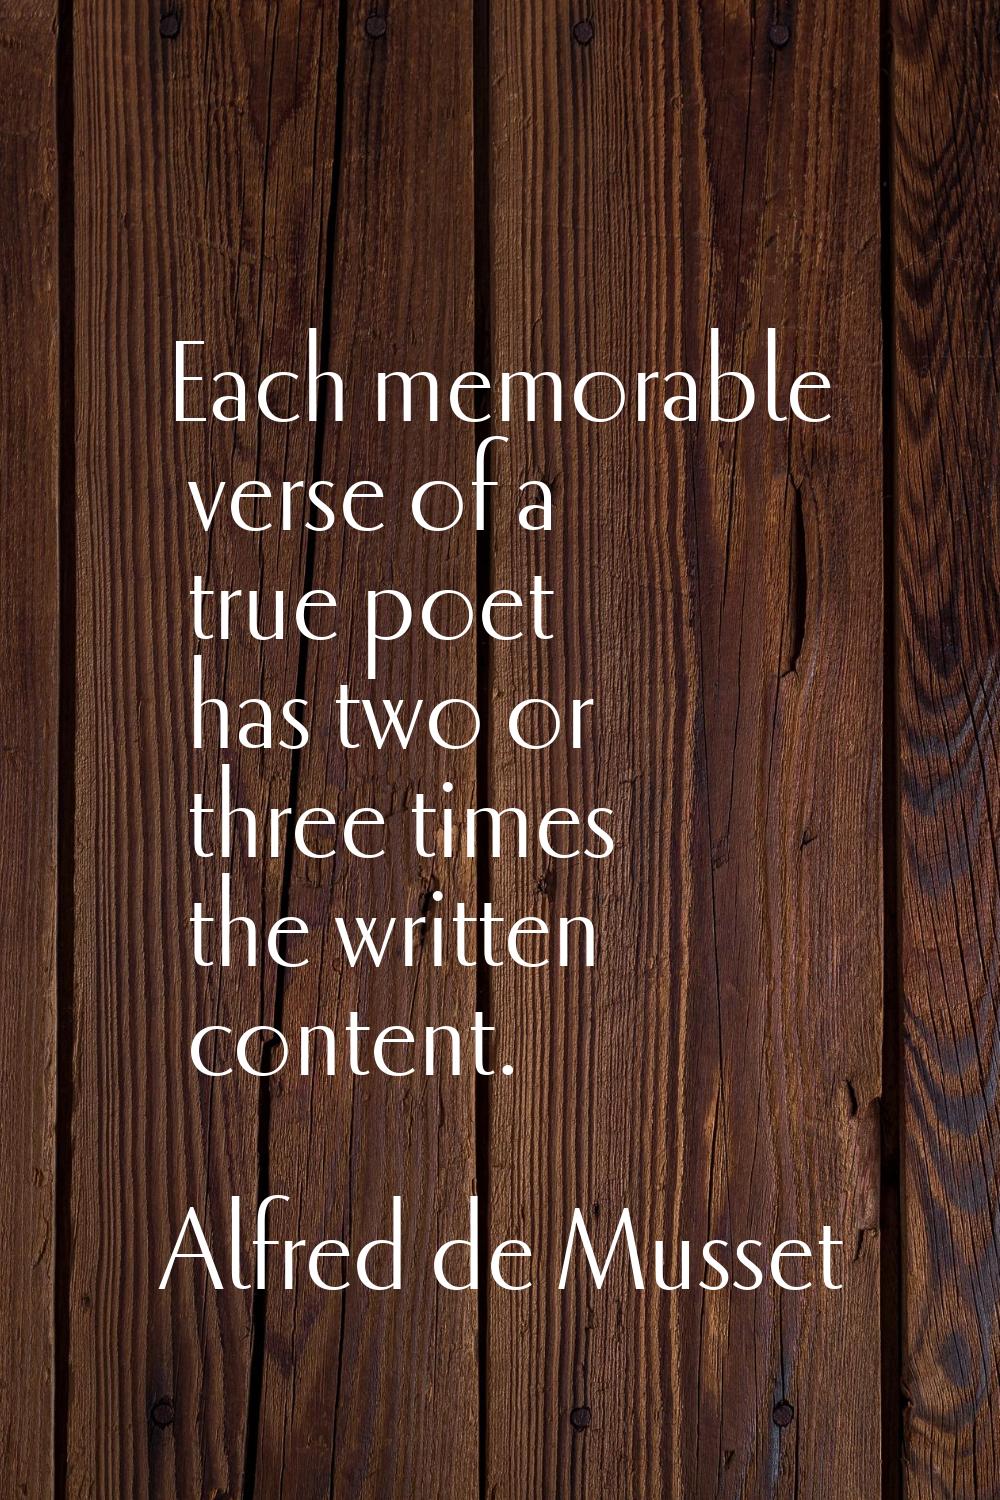 Each memorable verse of a true poet has two or three times the written content.